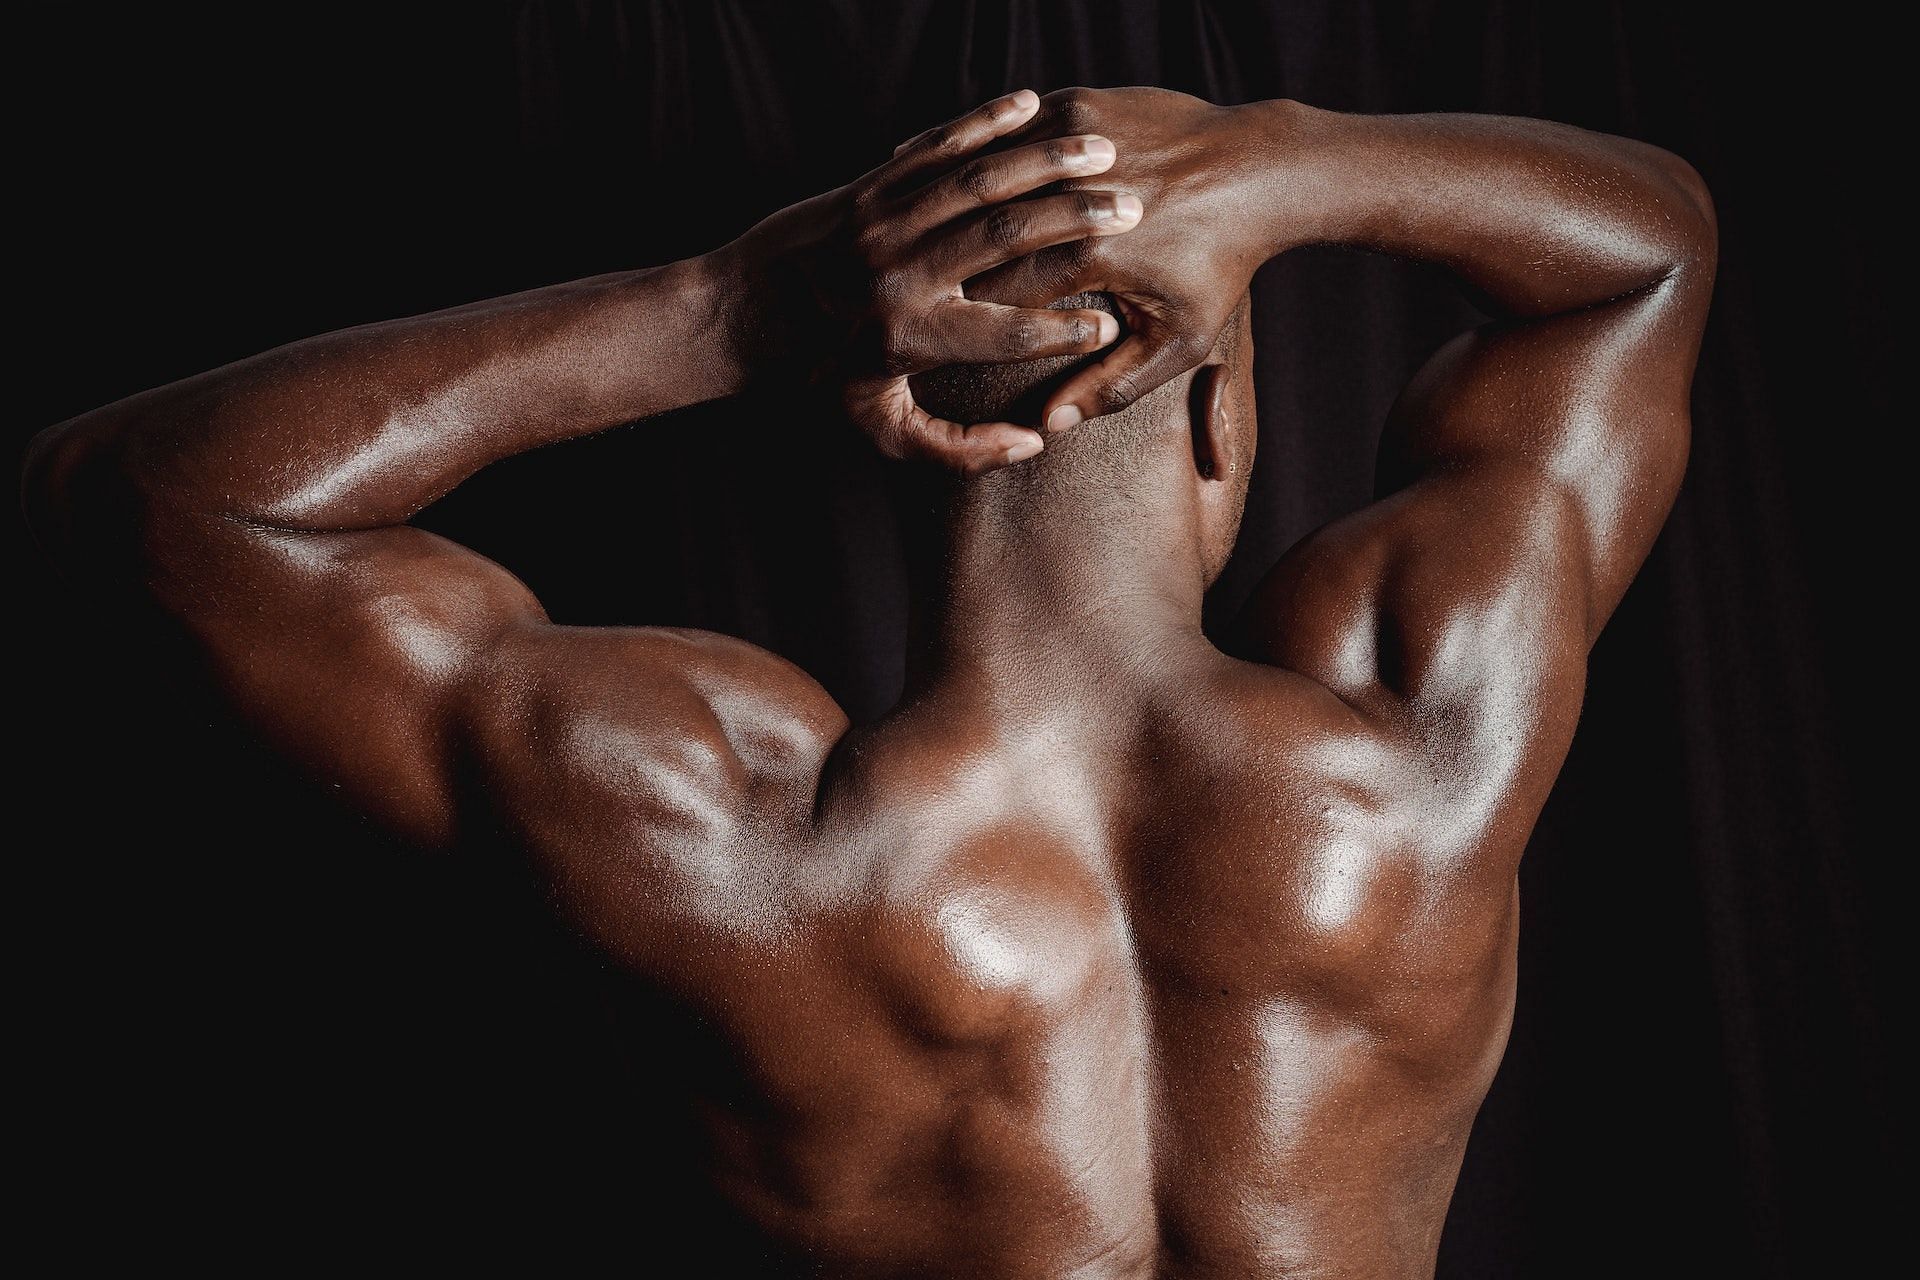 Ab exercises also target the back muscles. (Photo via Pexels/Mike Jones)